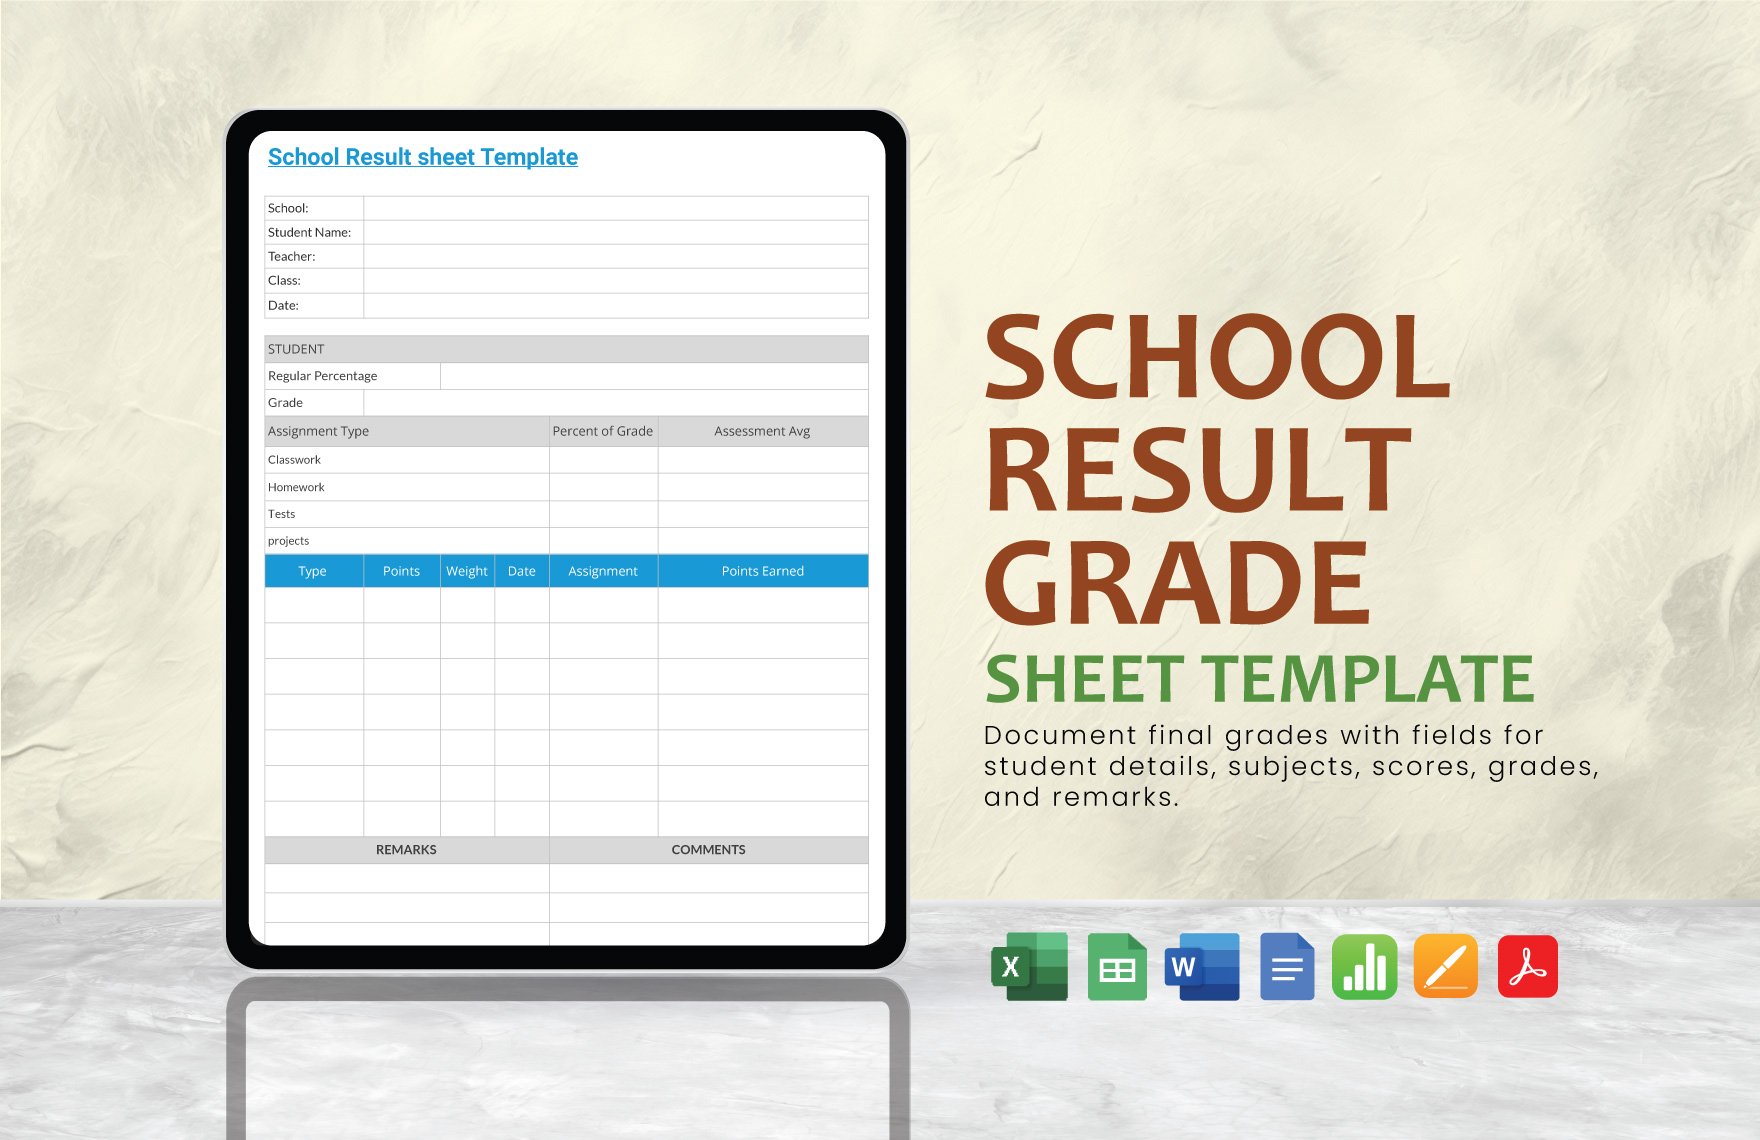 Free School Result Grade Sheet Template in Word, Google Docs, Excel, PDF, Google Sheets, Apple Pages, Apple Numbers